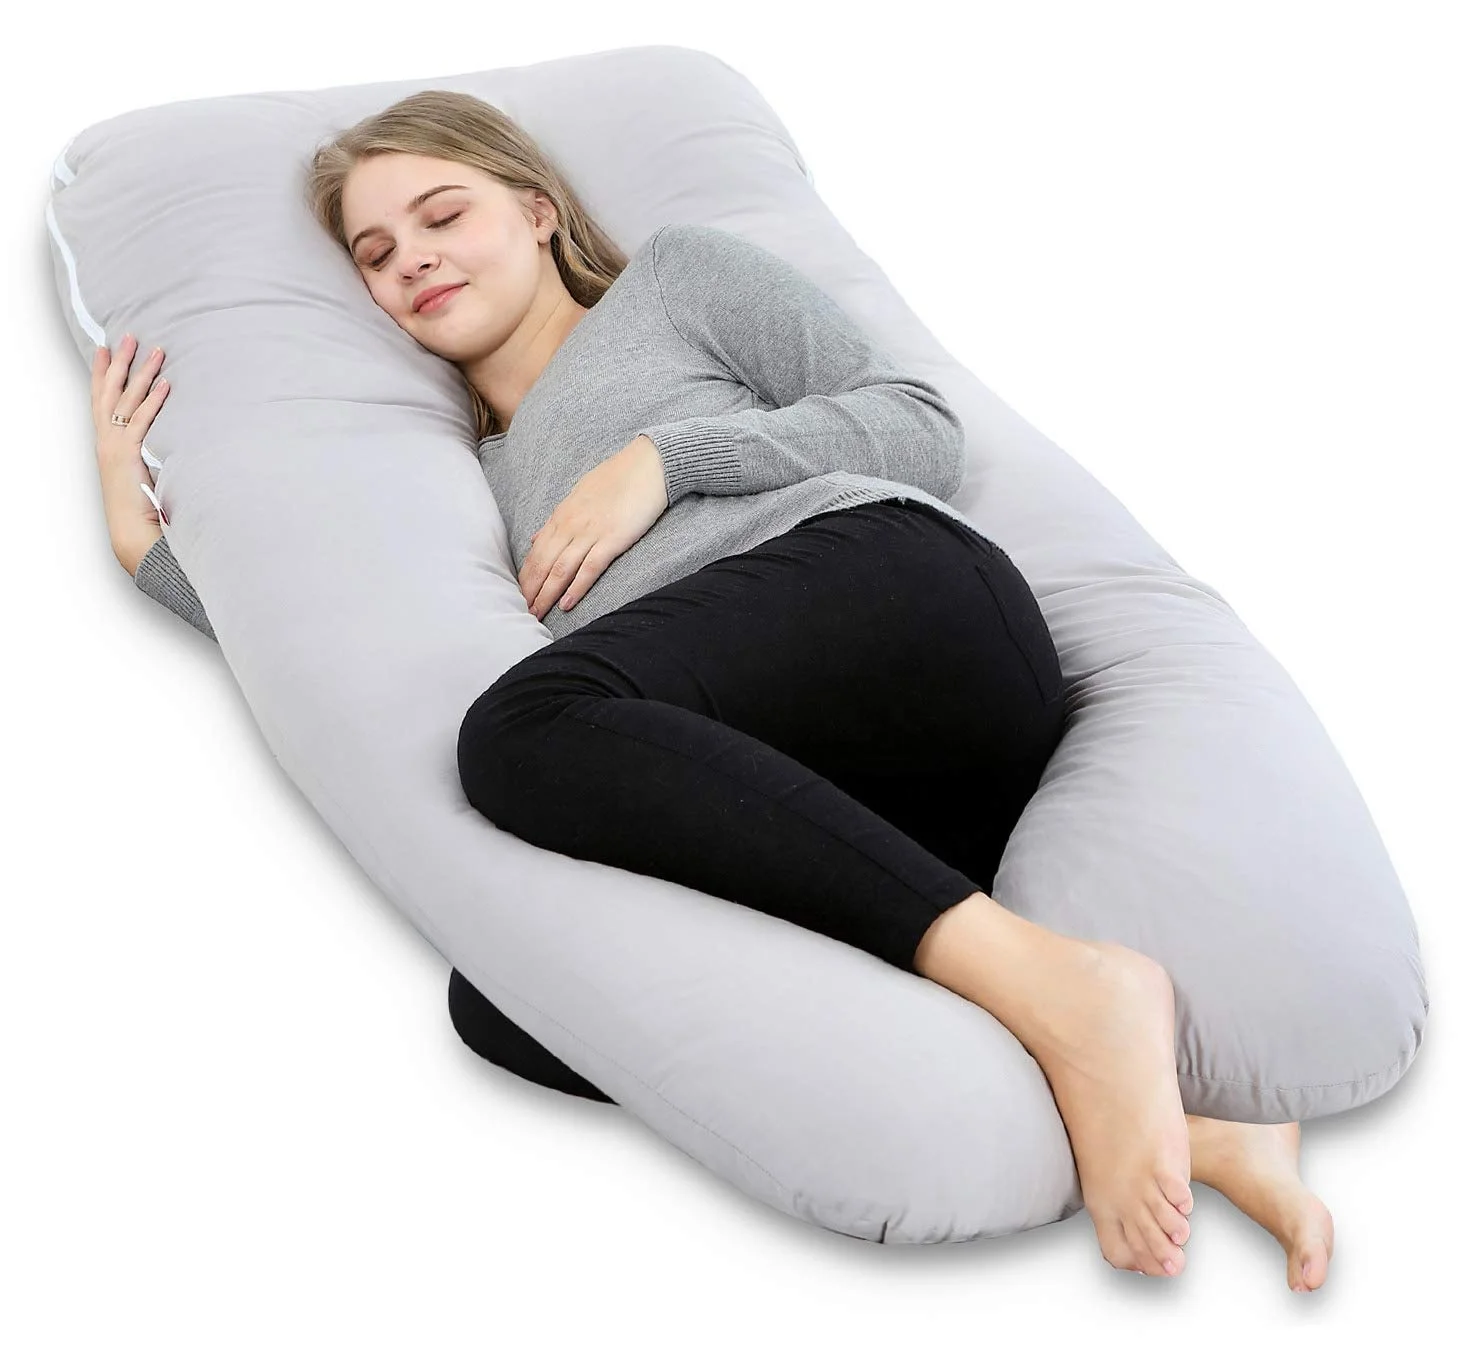 U Shaped The Best Maternity Pregnancy Support Body Pillow For Back Sleepers Buy Best Pregnancy